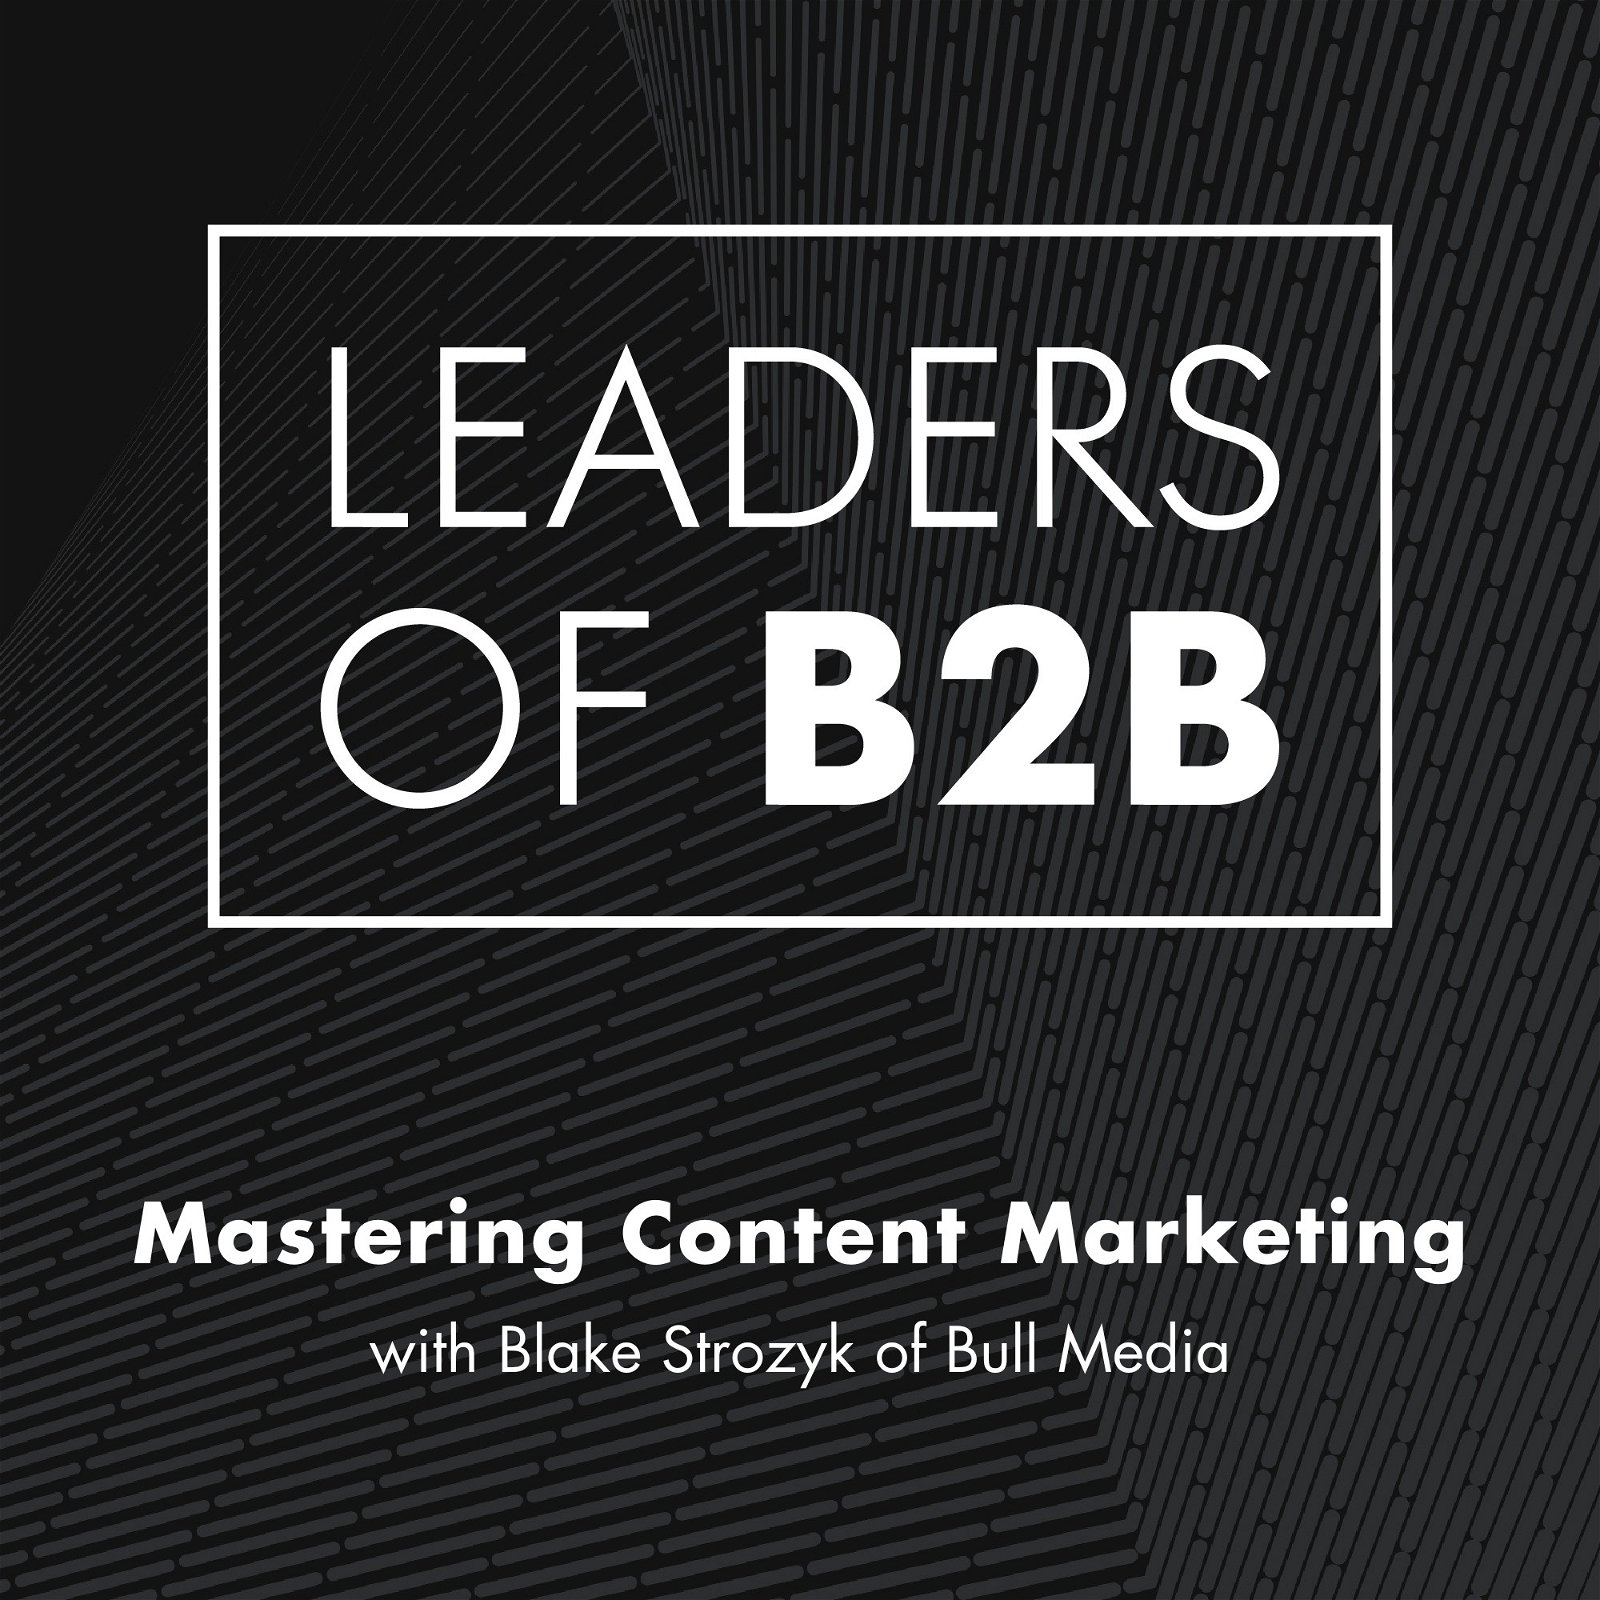 Mastering Content Marketing with Blake Strozyk of Bull Media